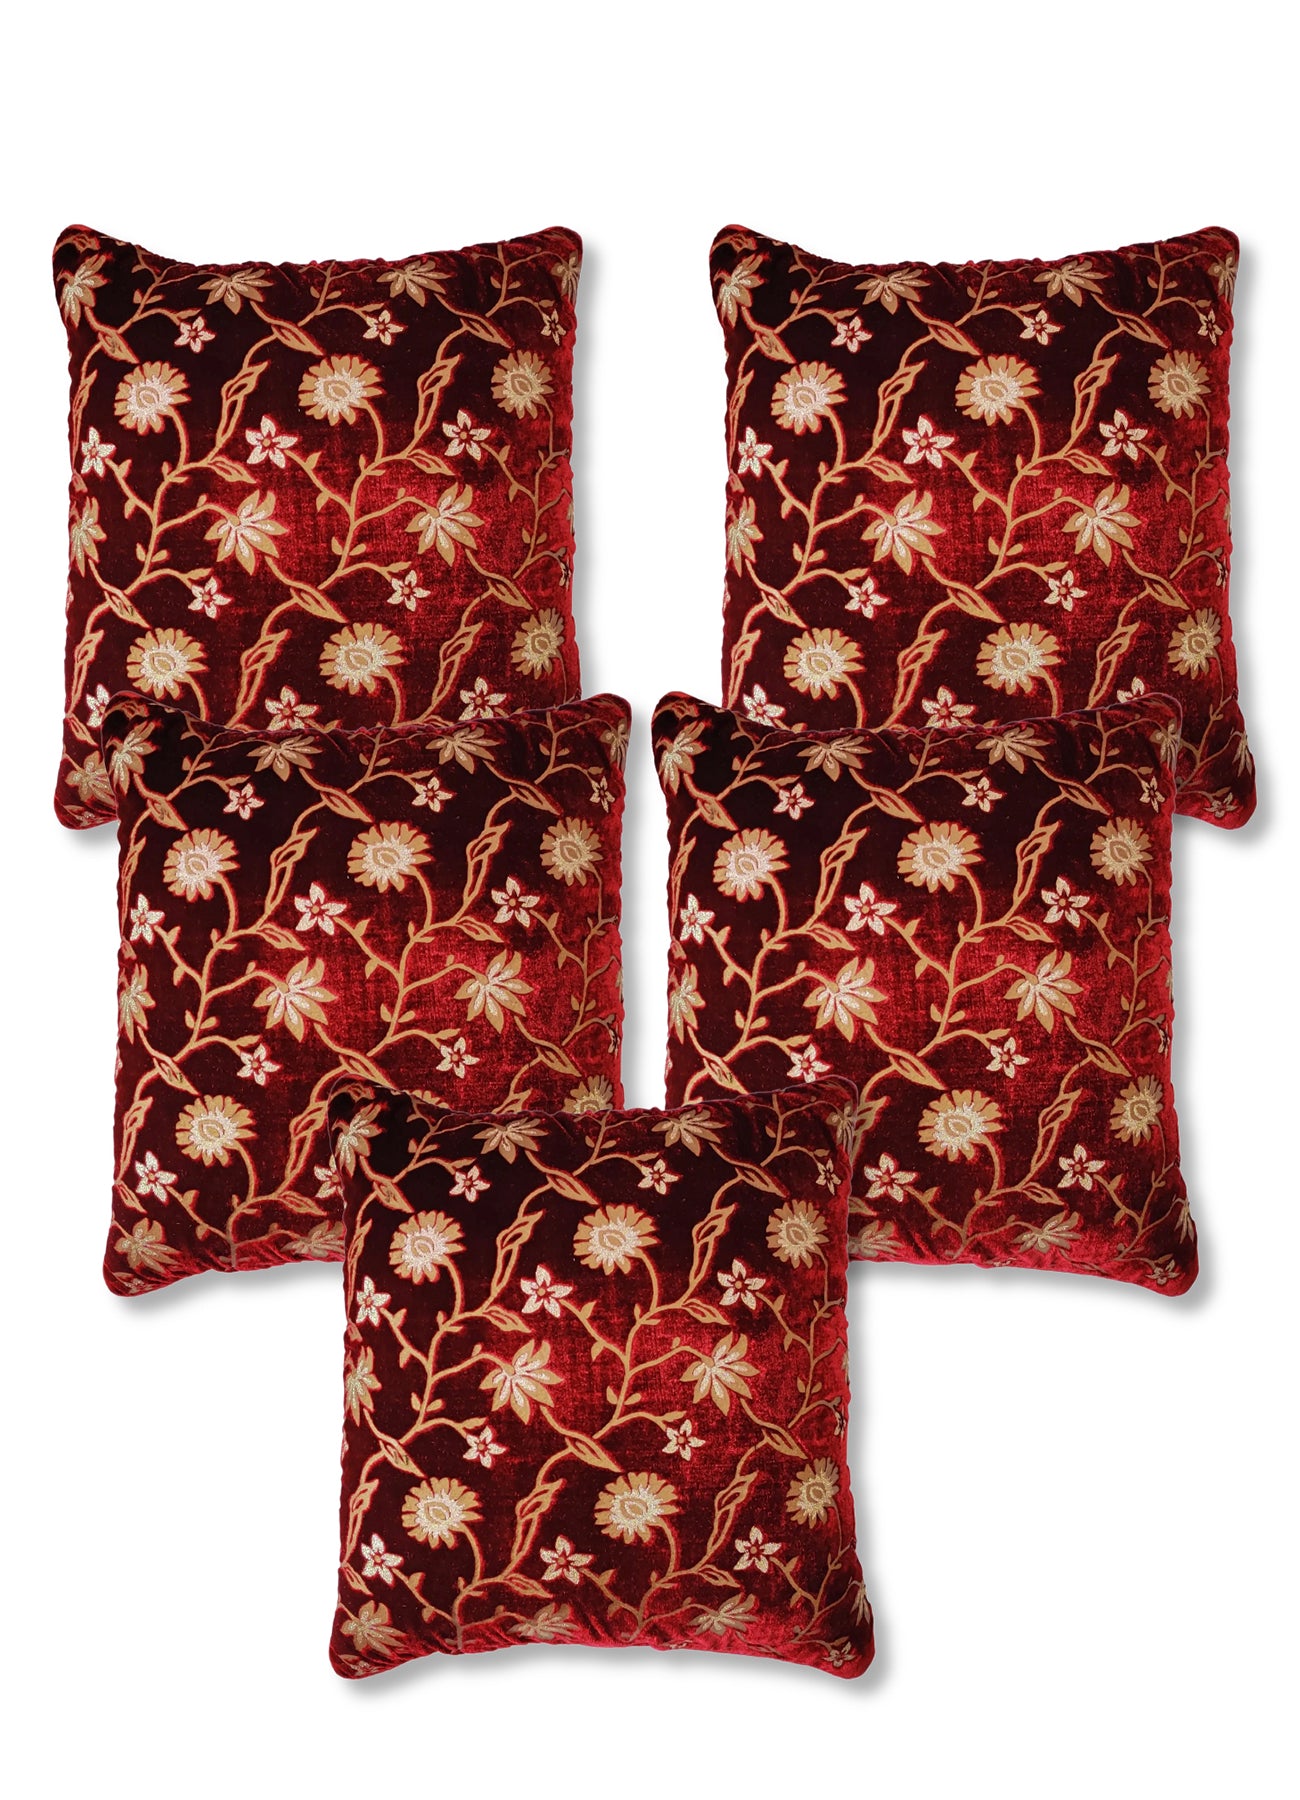 Premium Velvet Cushion Covers: Softness and Style Combined, Pack of 5 Pieces, Maroon, 16 X 16 Inches